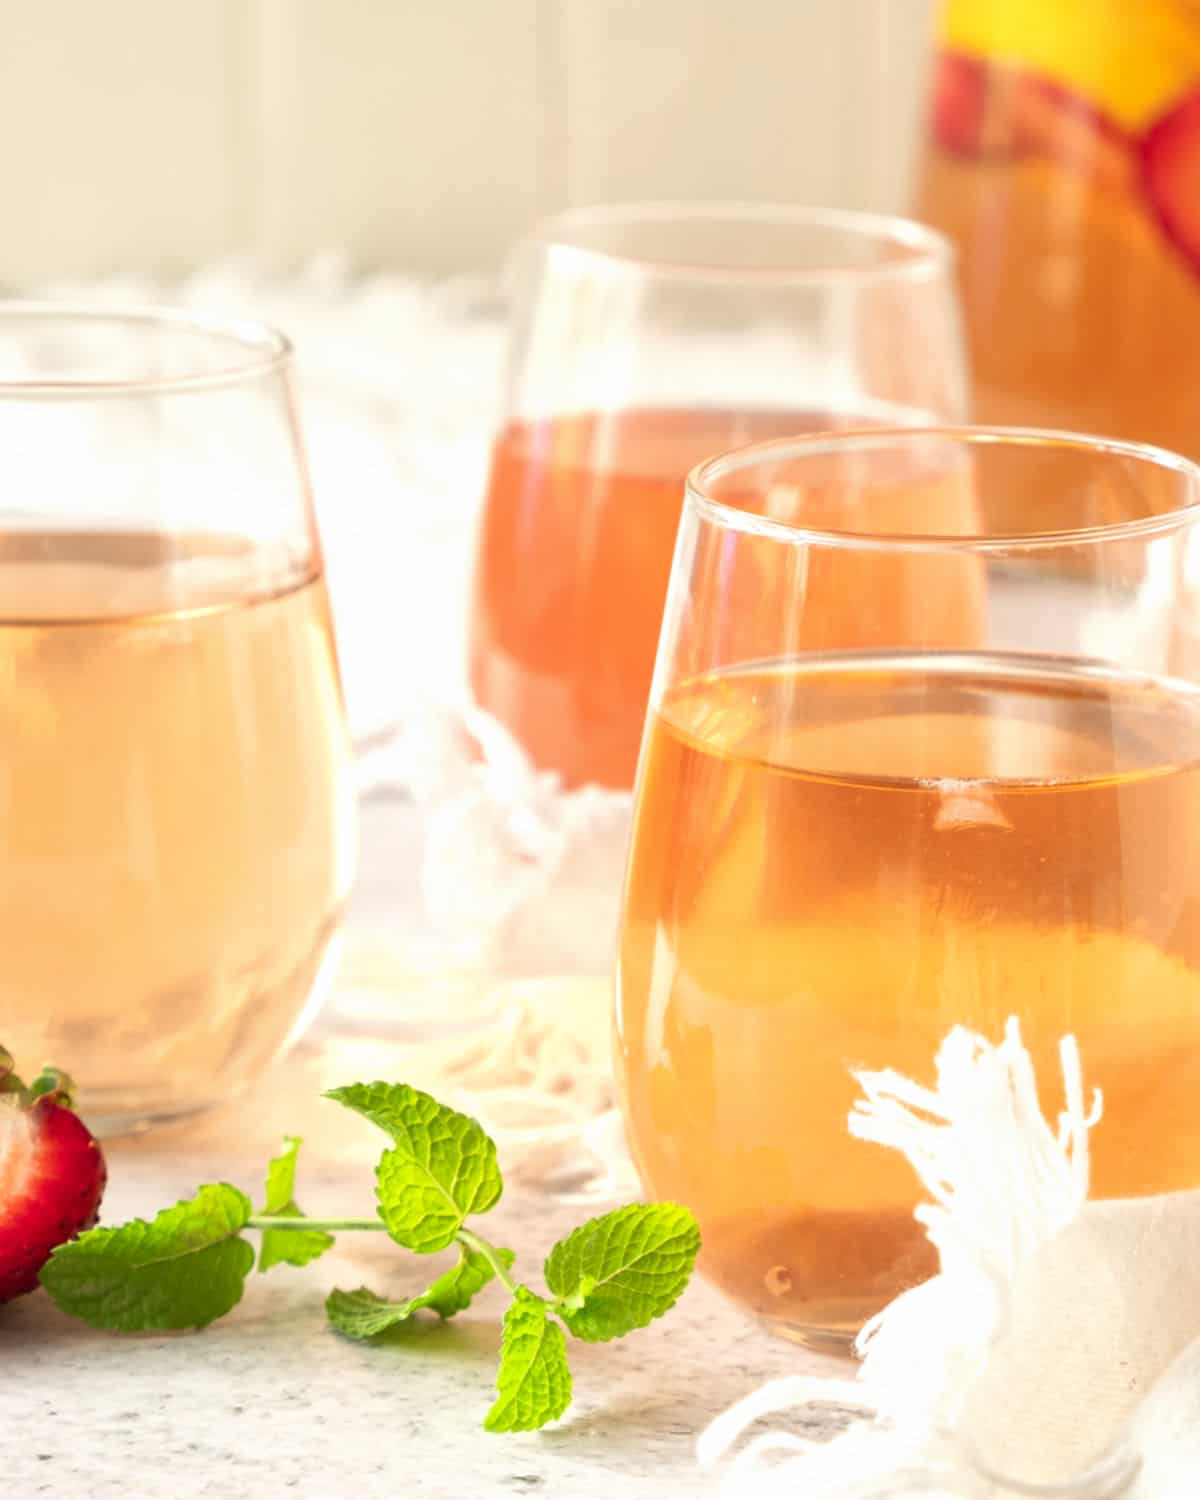 Three glasses with rose sangria, no fruit. White beige background with pitcher. Mint leaves.